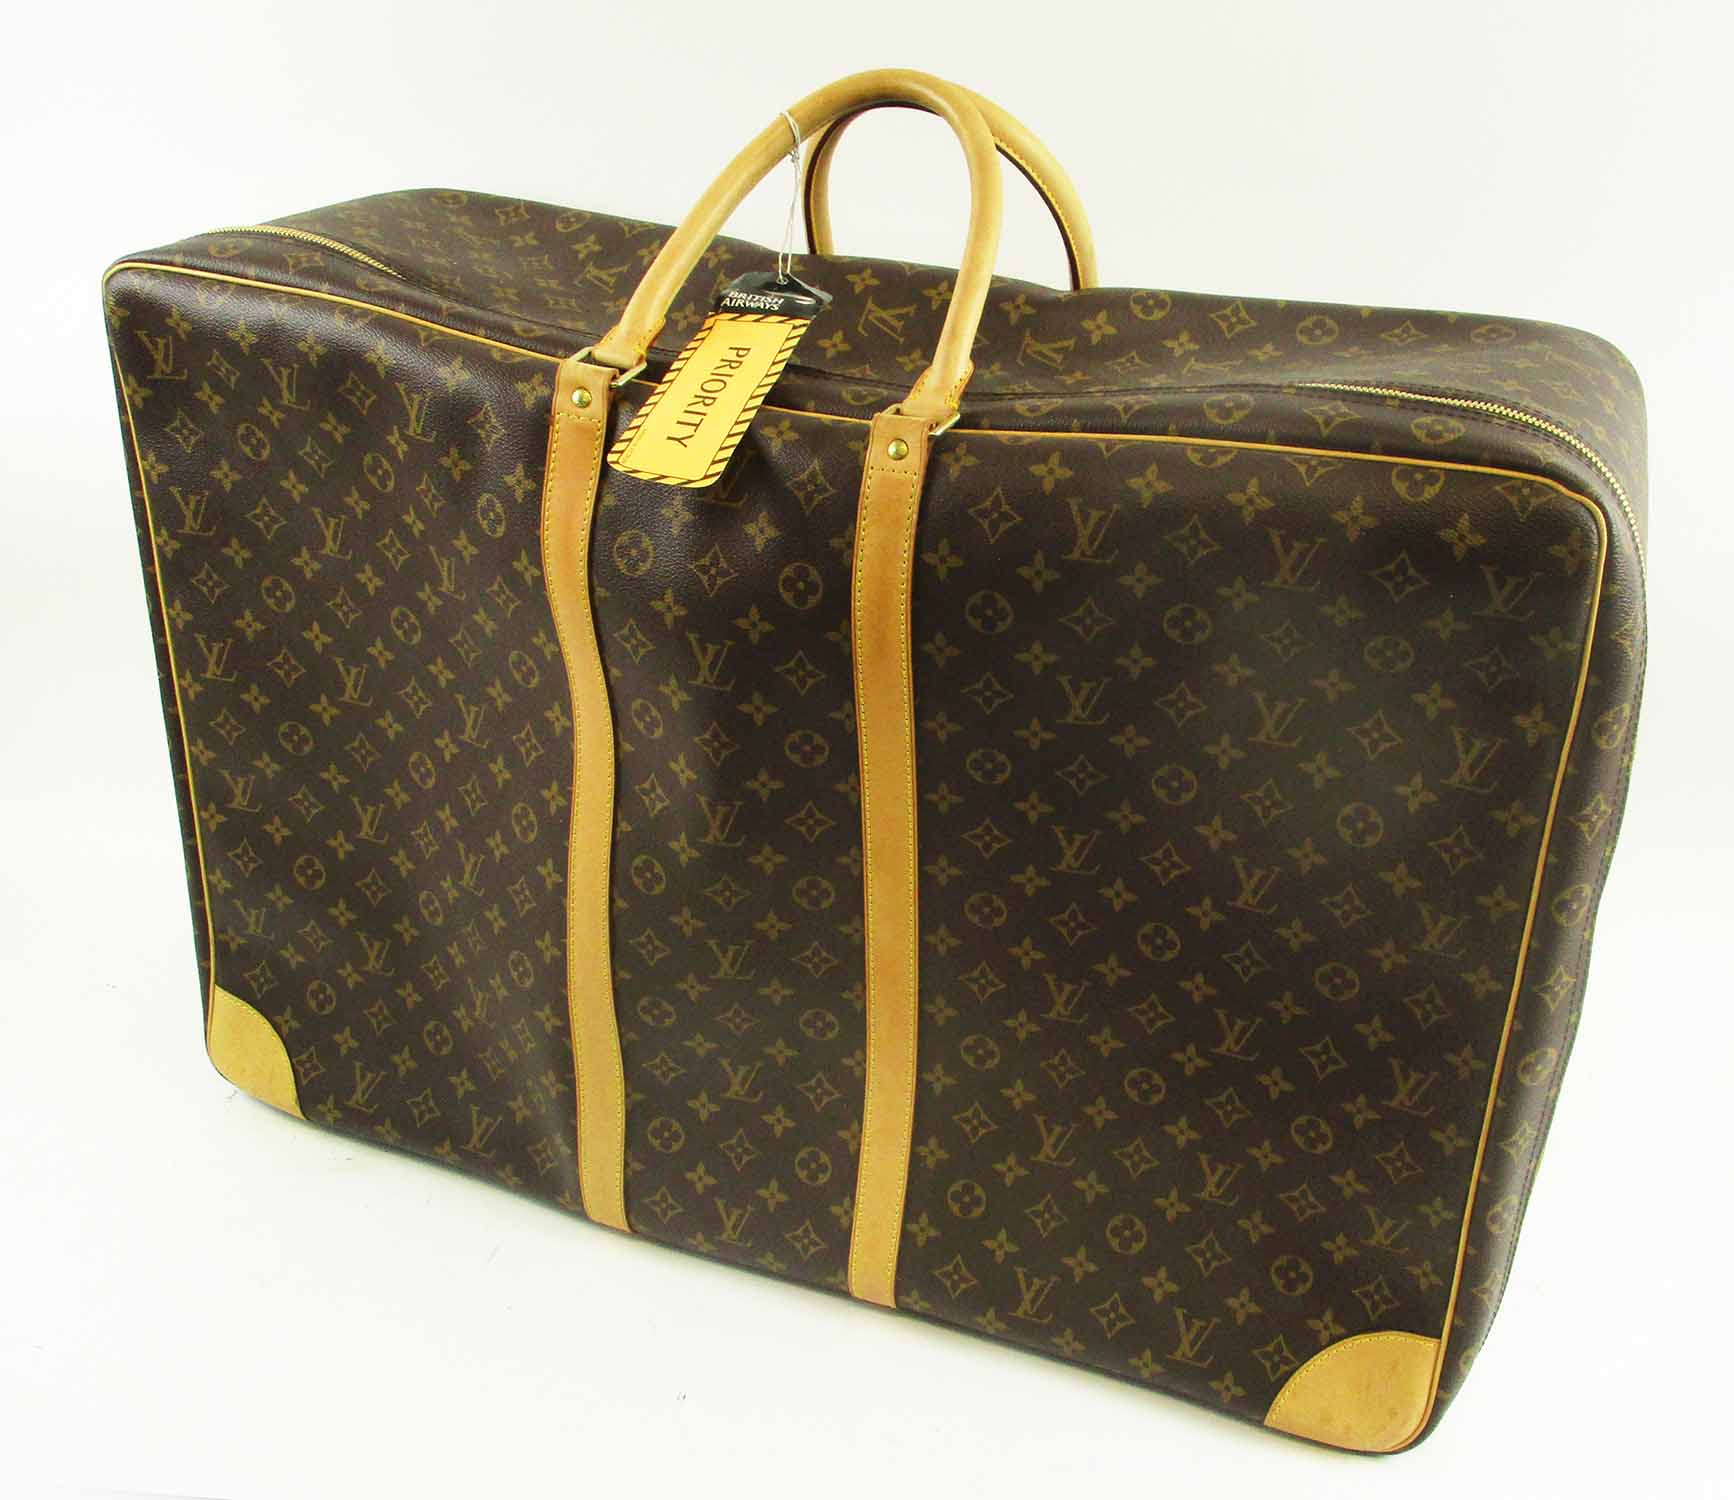 COLLECTORS ITEM * Louis Vuitton Sirius 70 * Luggage Travel * SOLD